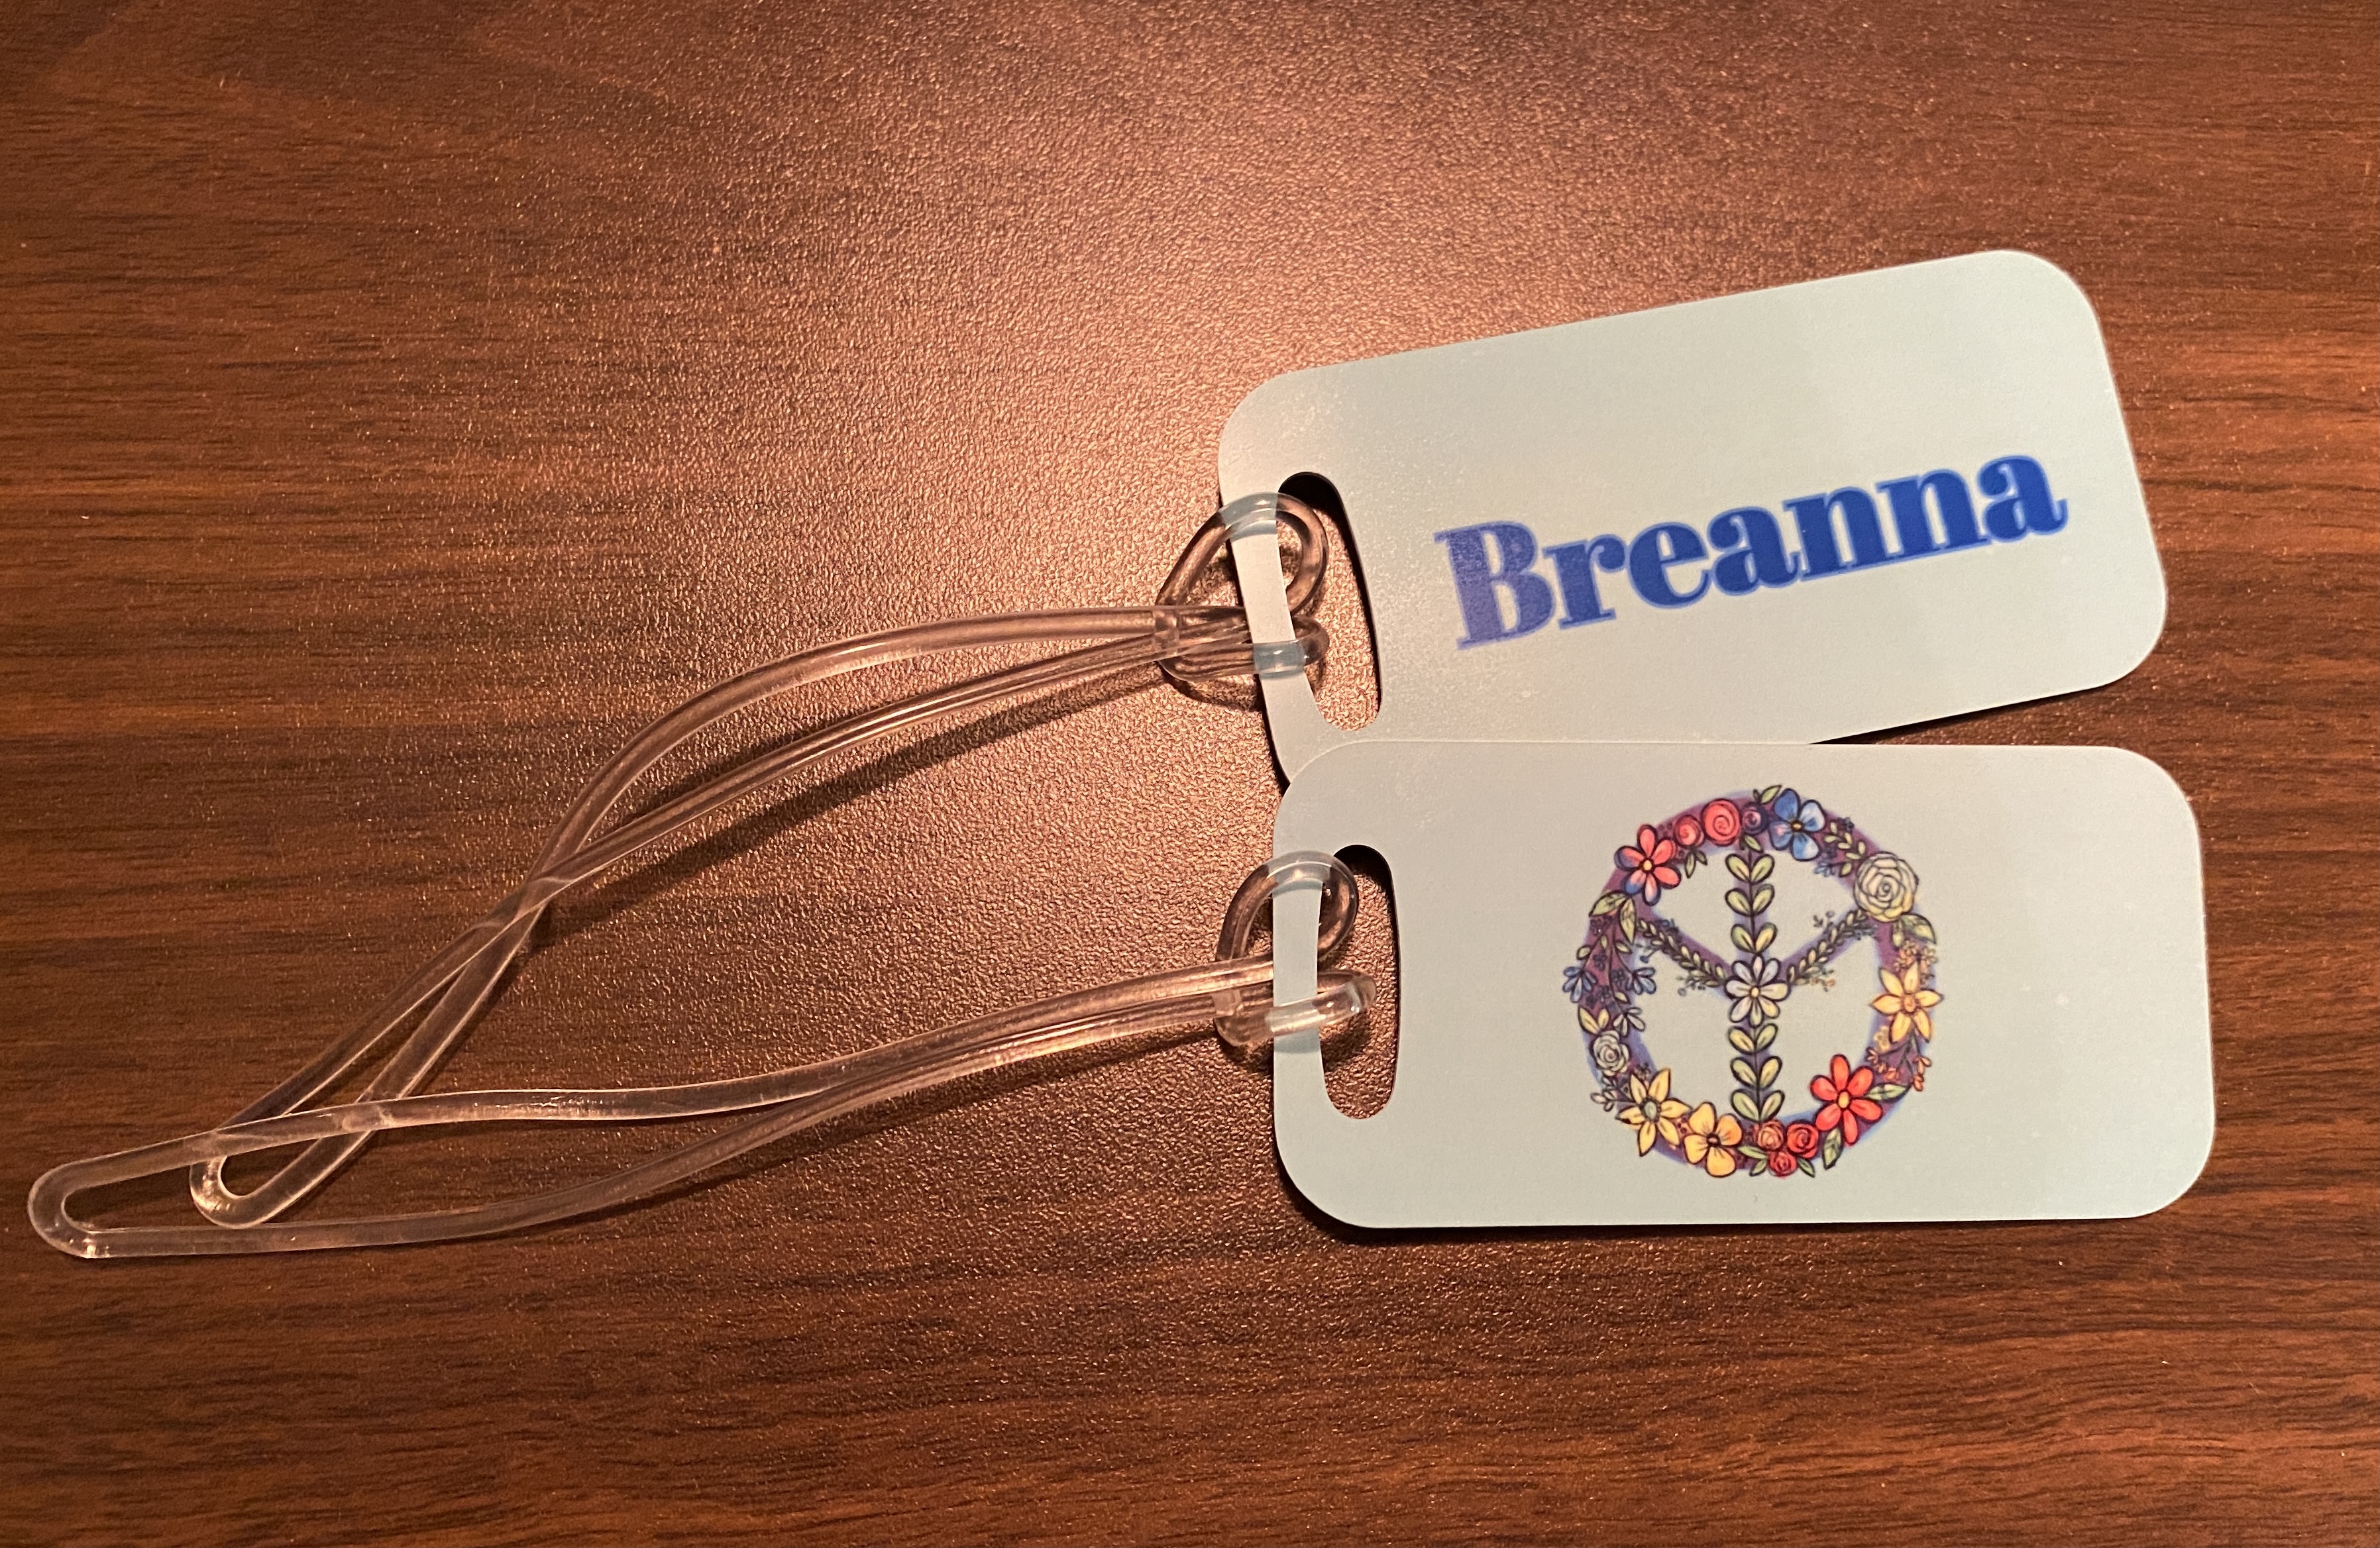 This aluminum bag tag is perfect for a graduation gift for college bound bags.